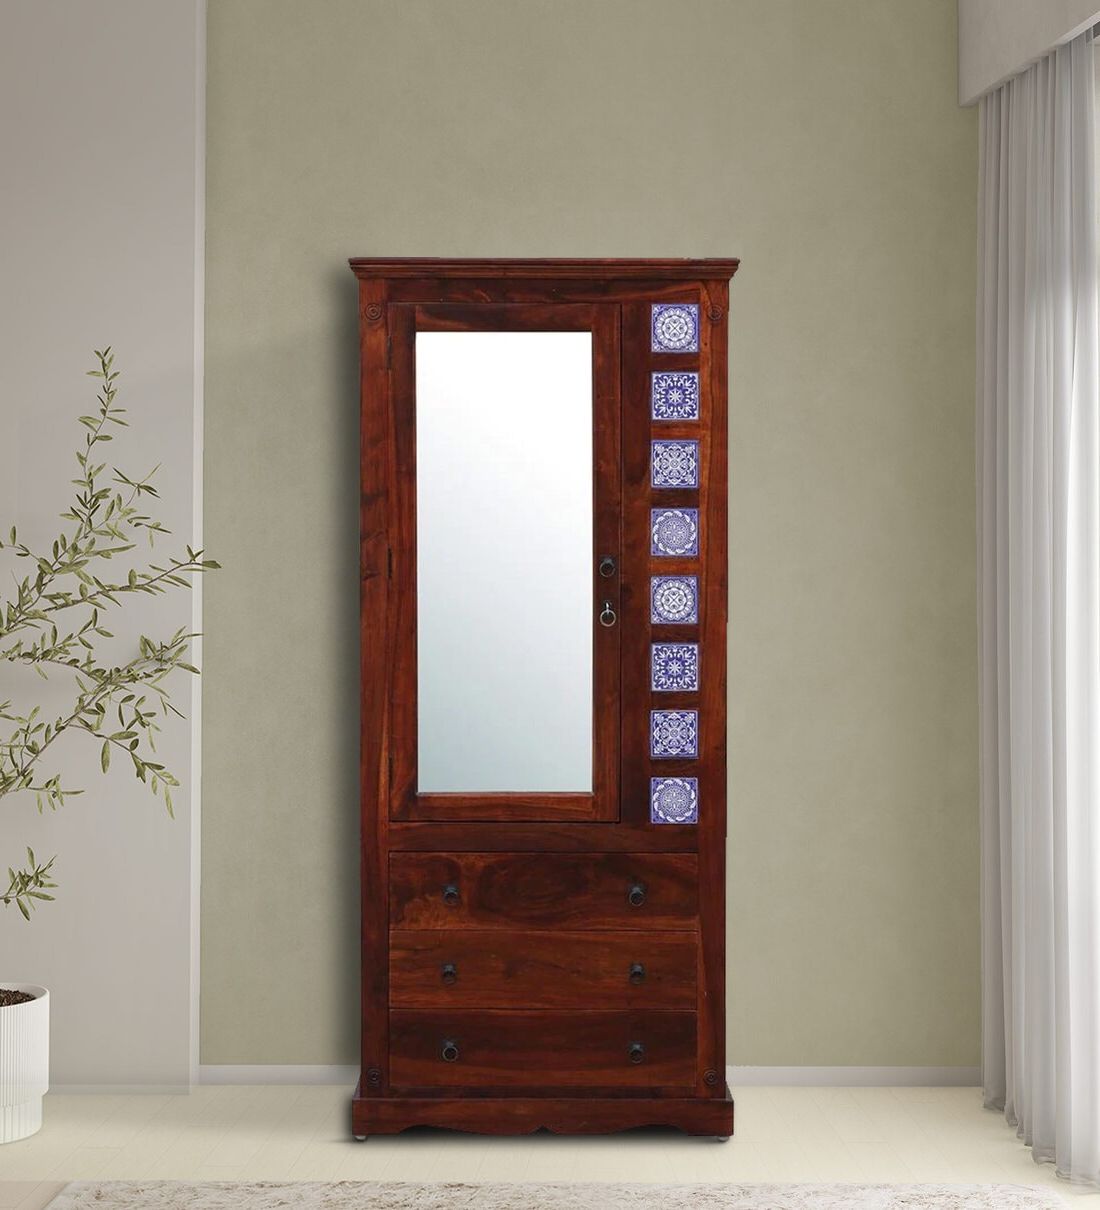 Buy Kamchini Sheesham Wood Single Door Wardrobe In Scratch Resistant Honey  Oak Finish With Mirror At 1% Offmudramark From Pepperfry | Pepperfry With Single Door Mirrored Wardrobes (Gallery 12 of 20)